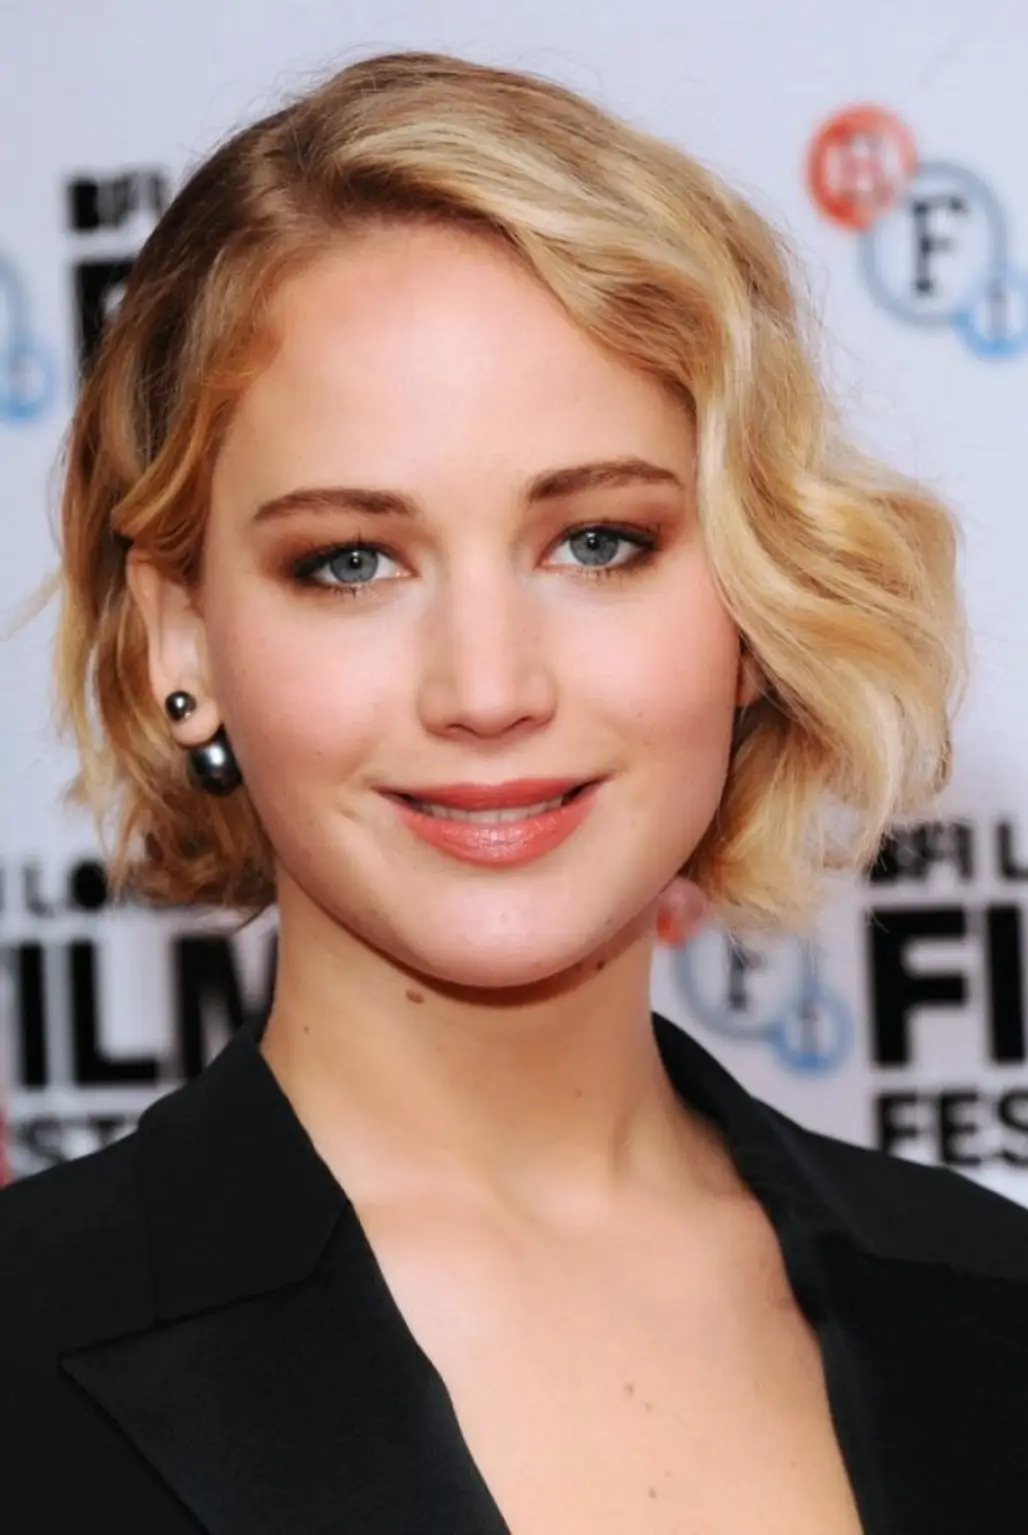 Need to Look Sophisticated? Jennifer Lawrence Has Got You Covered